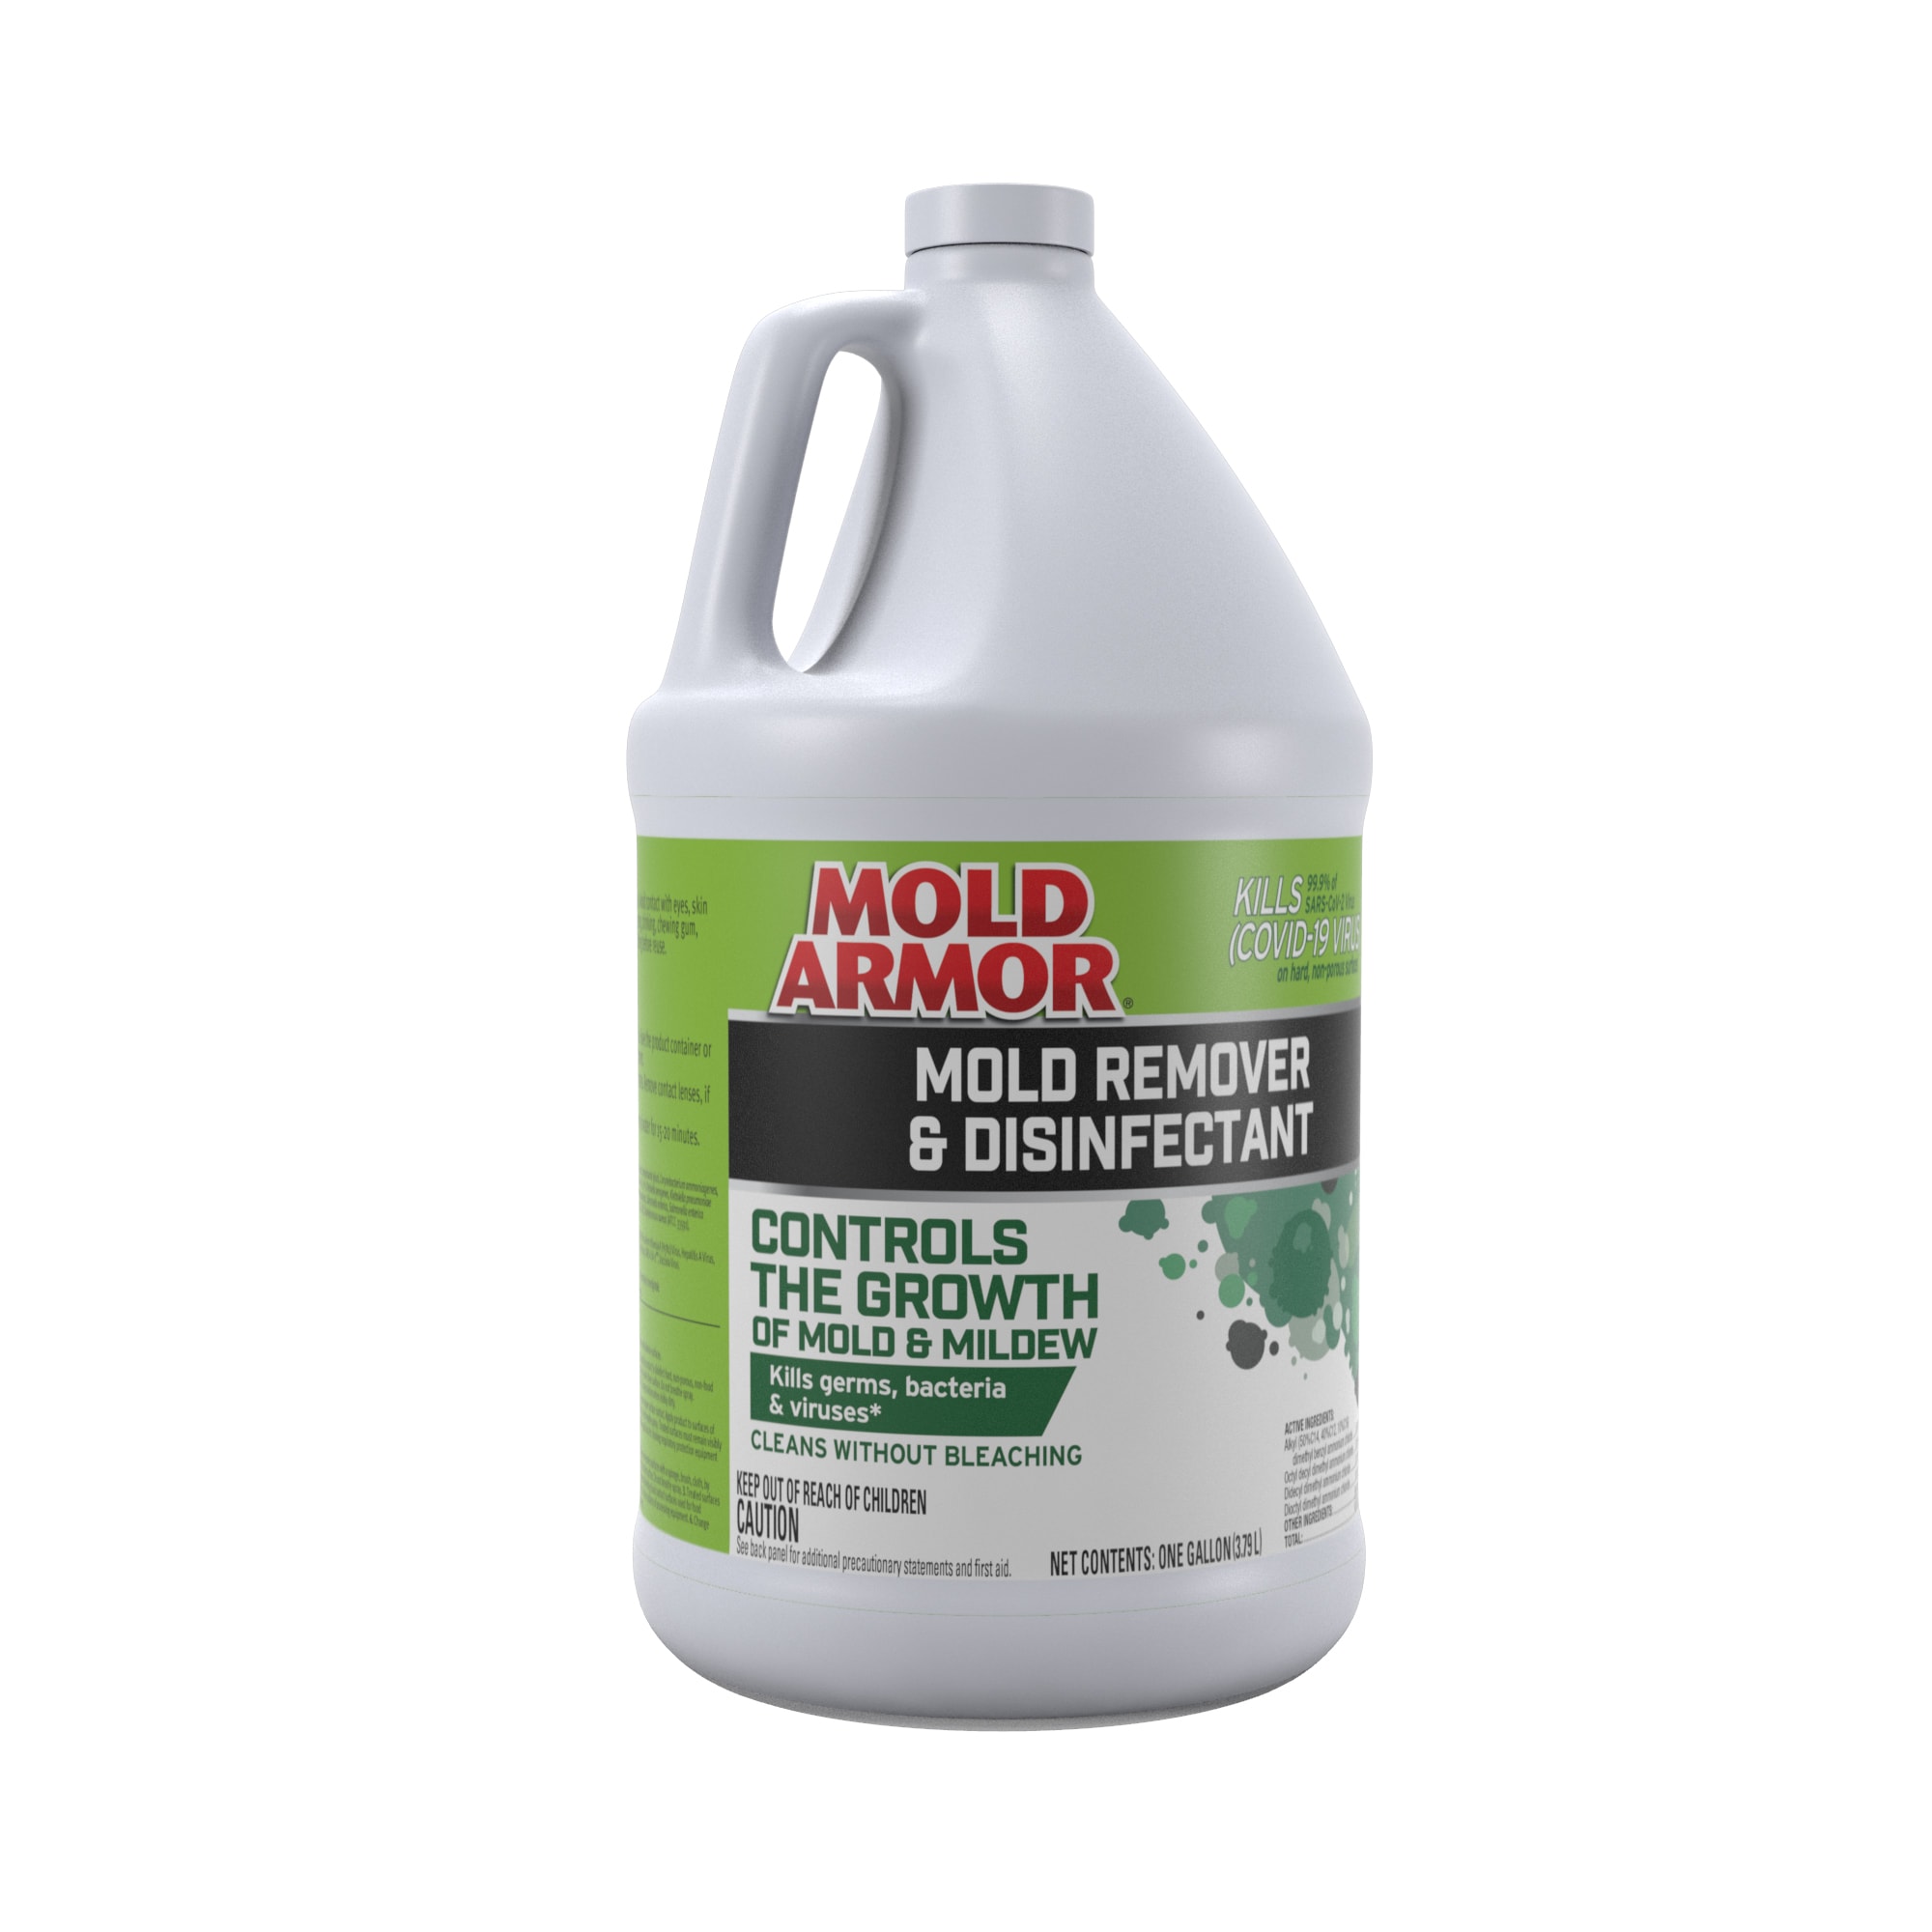 Mold Armor Indoor Mold Test Kit - Detects Mold Presence, Quick